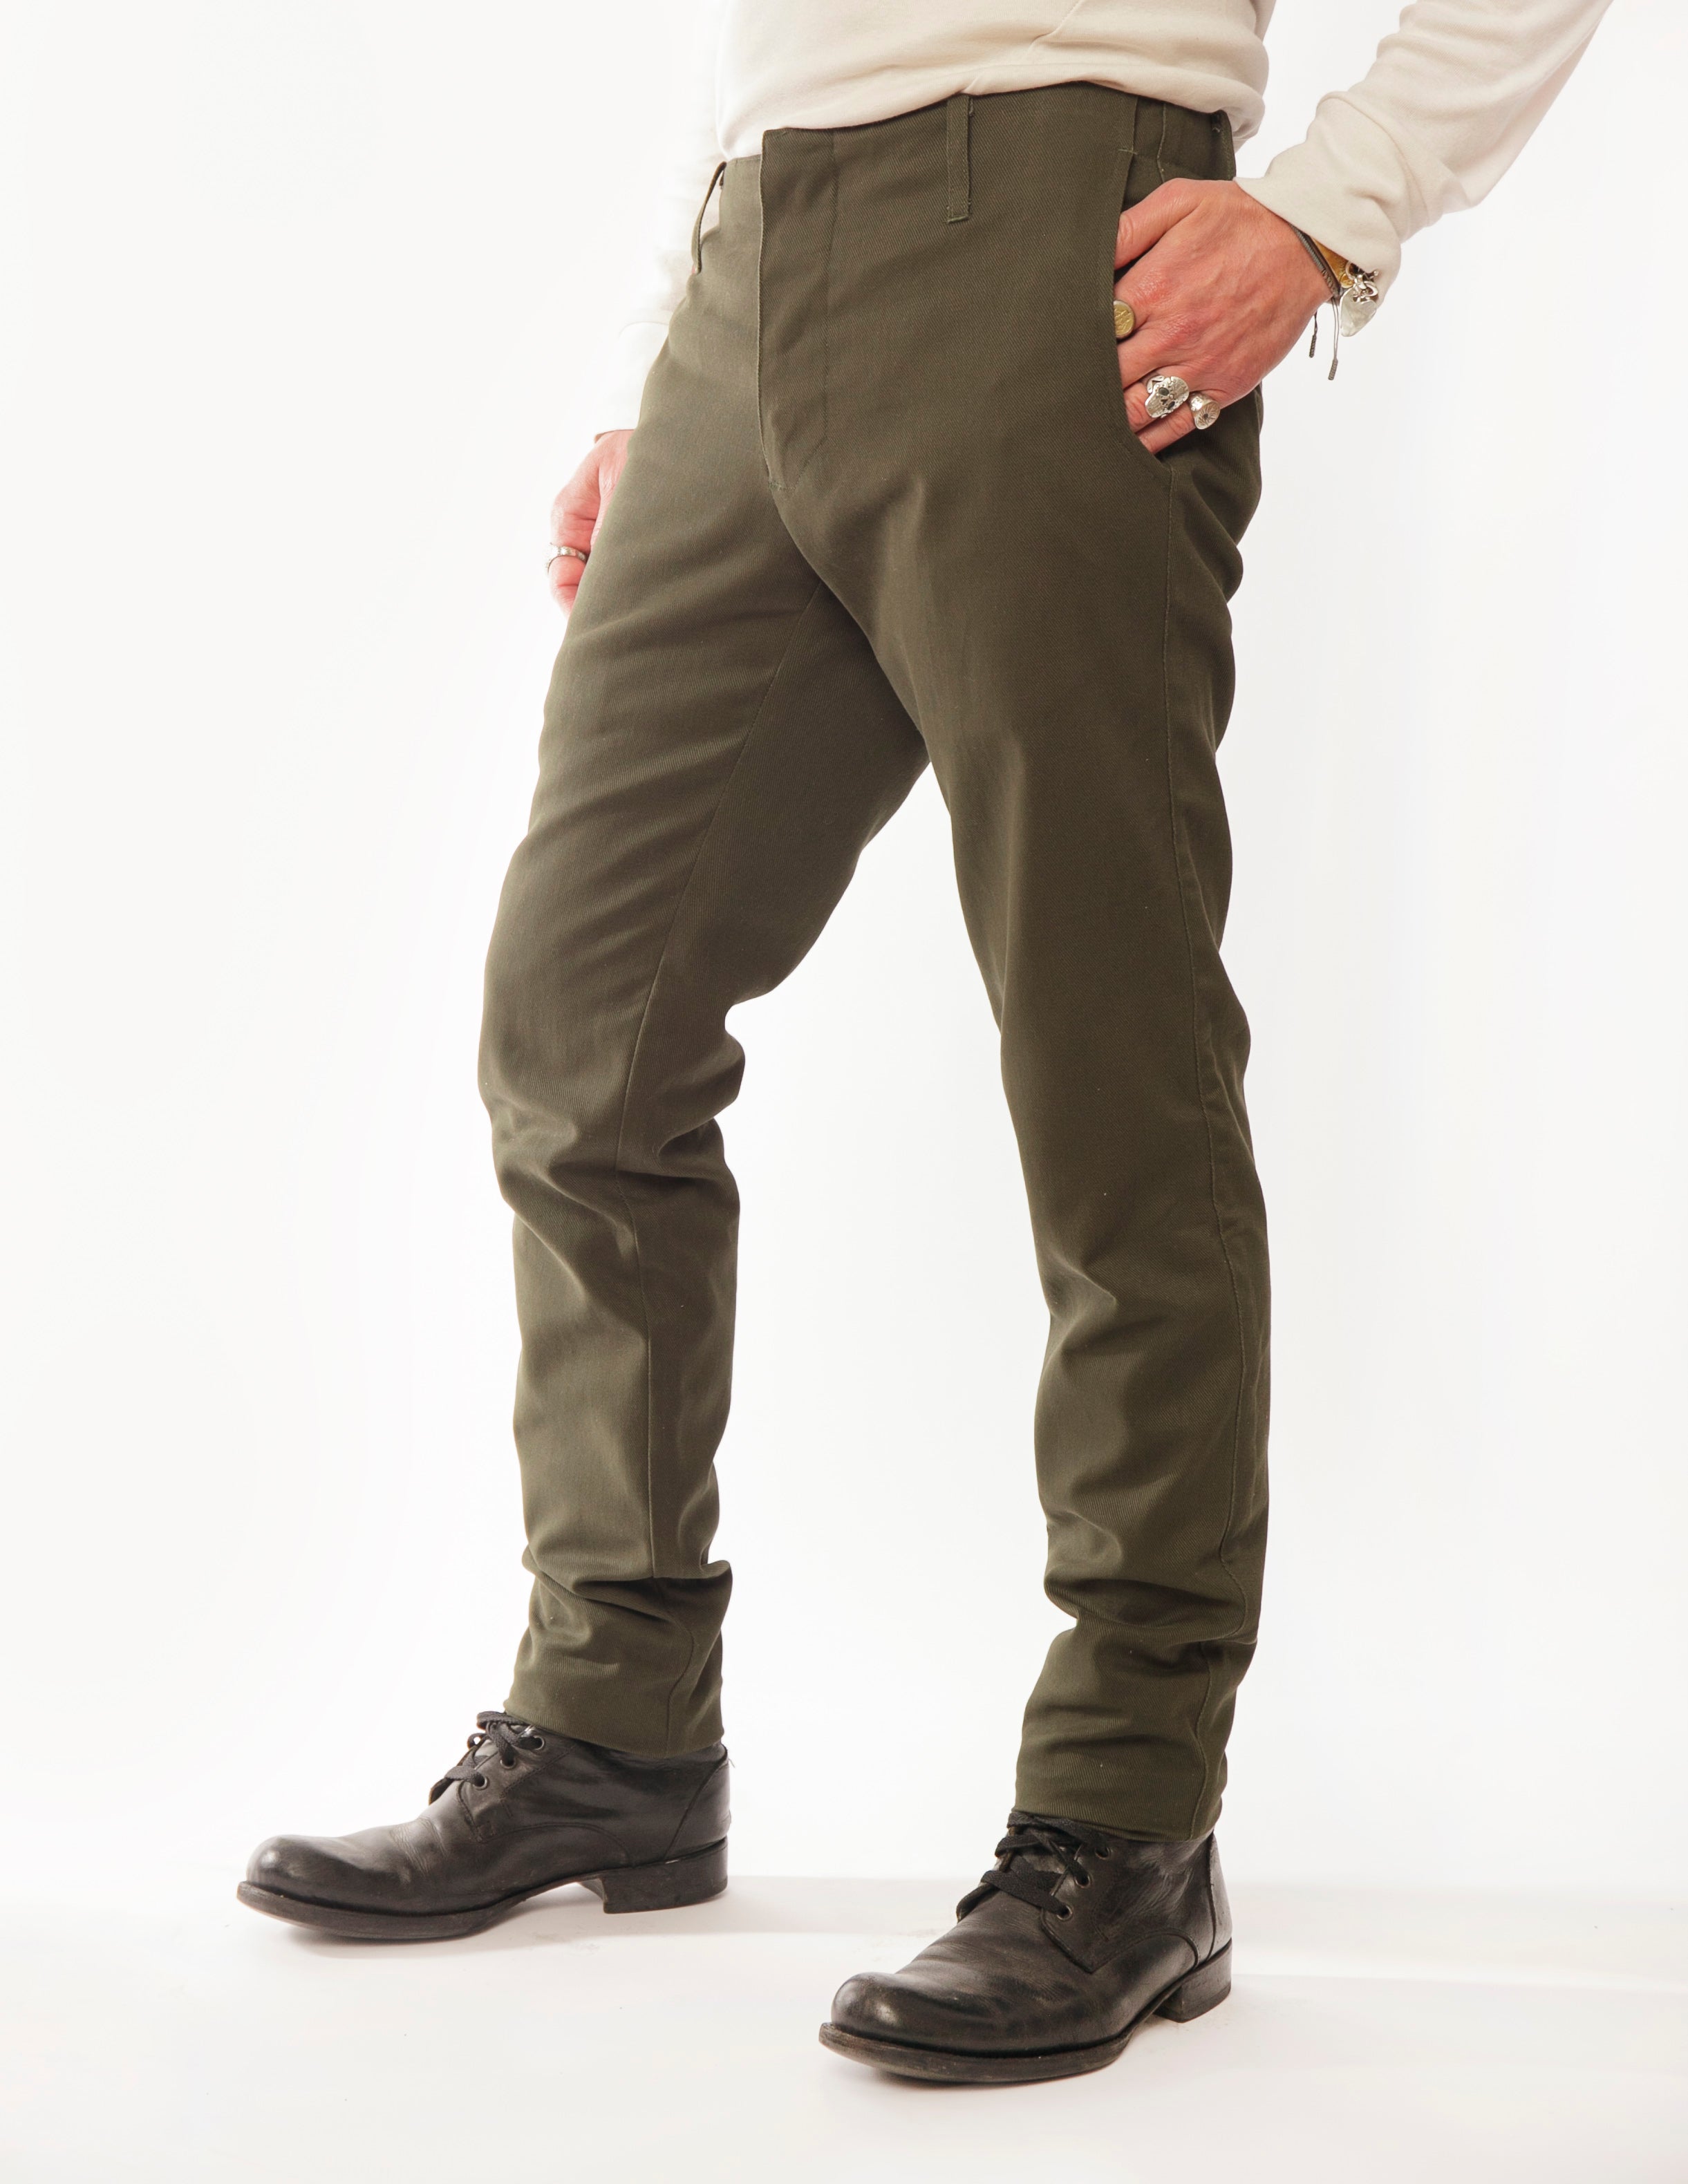 Dickies Trousers - 874 Work Mortgage Rec - Olive Green